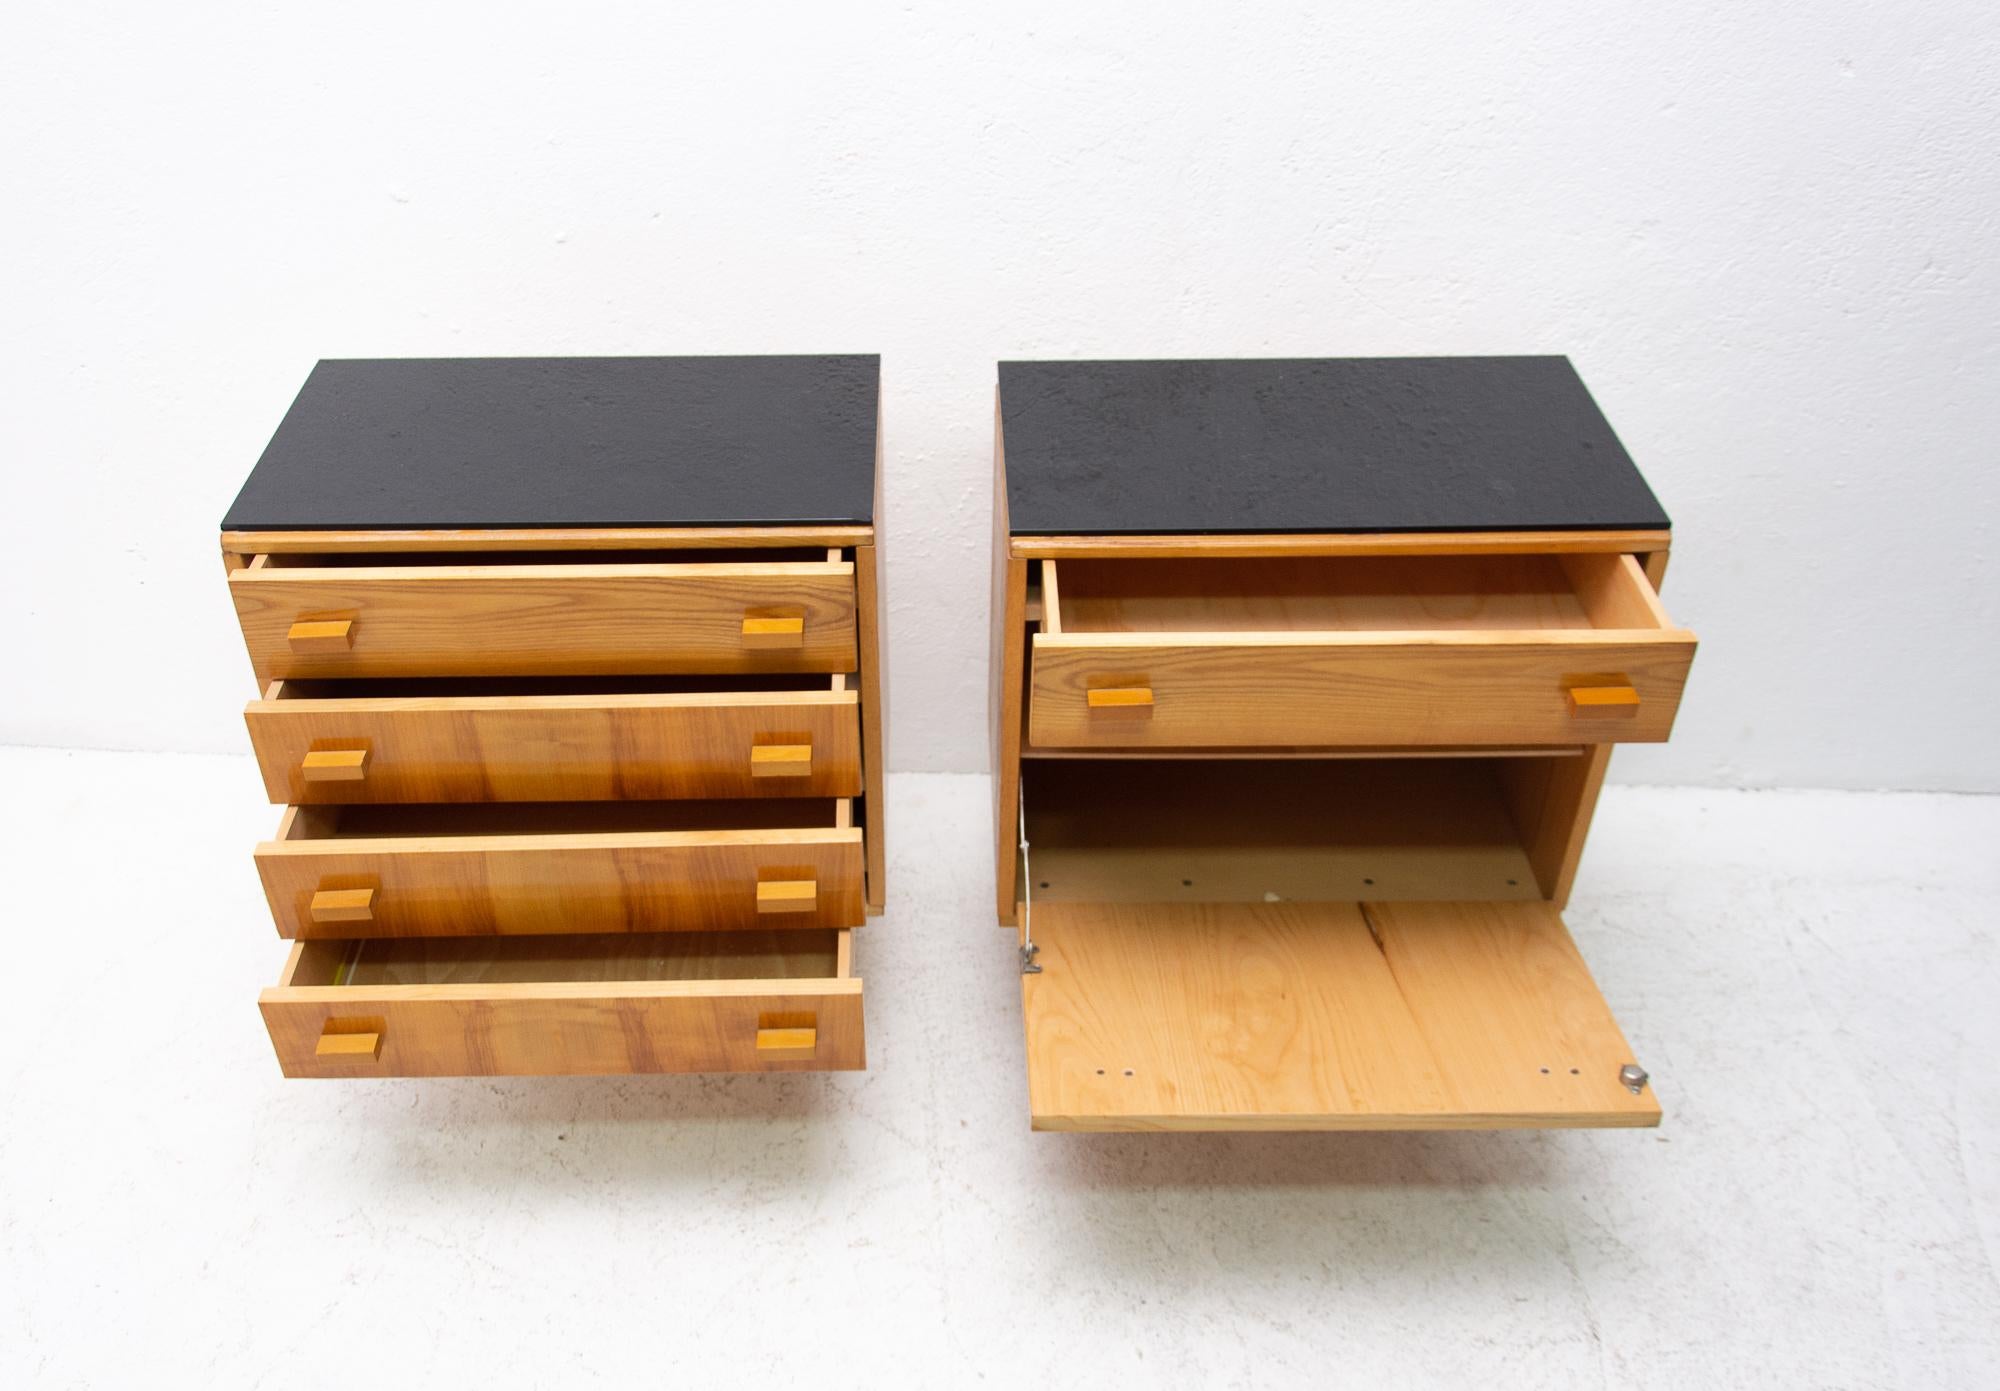 20th Century Midcentury Nightstands, Chest of Drawers by Nový Domov, 1970s, Czechoslovakia